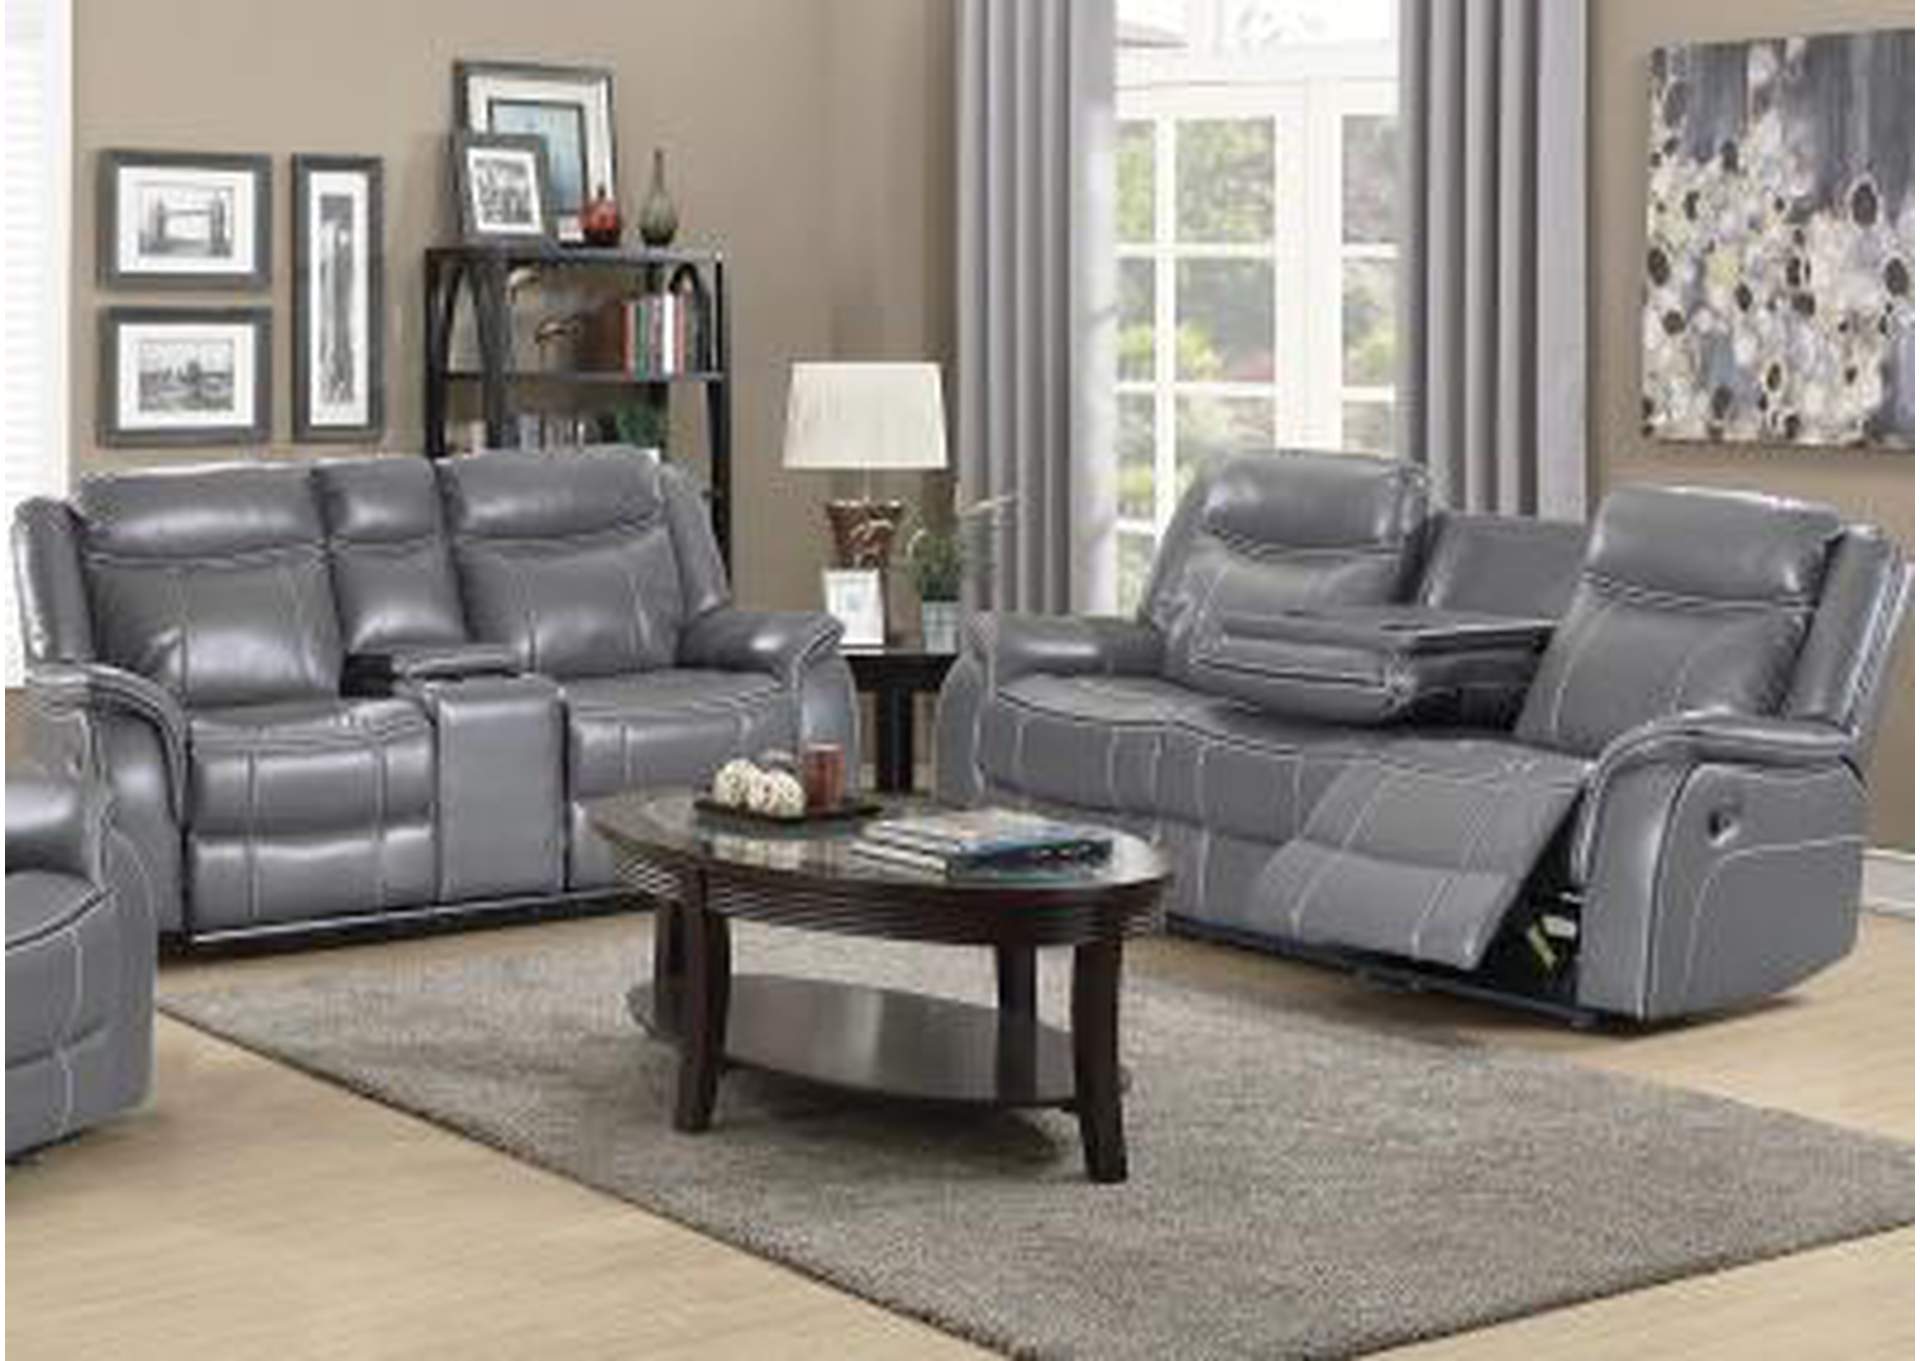 Grey Reclining Sofa With Drop Down Table,Nationwide